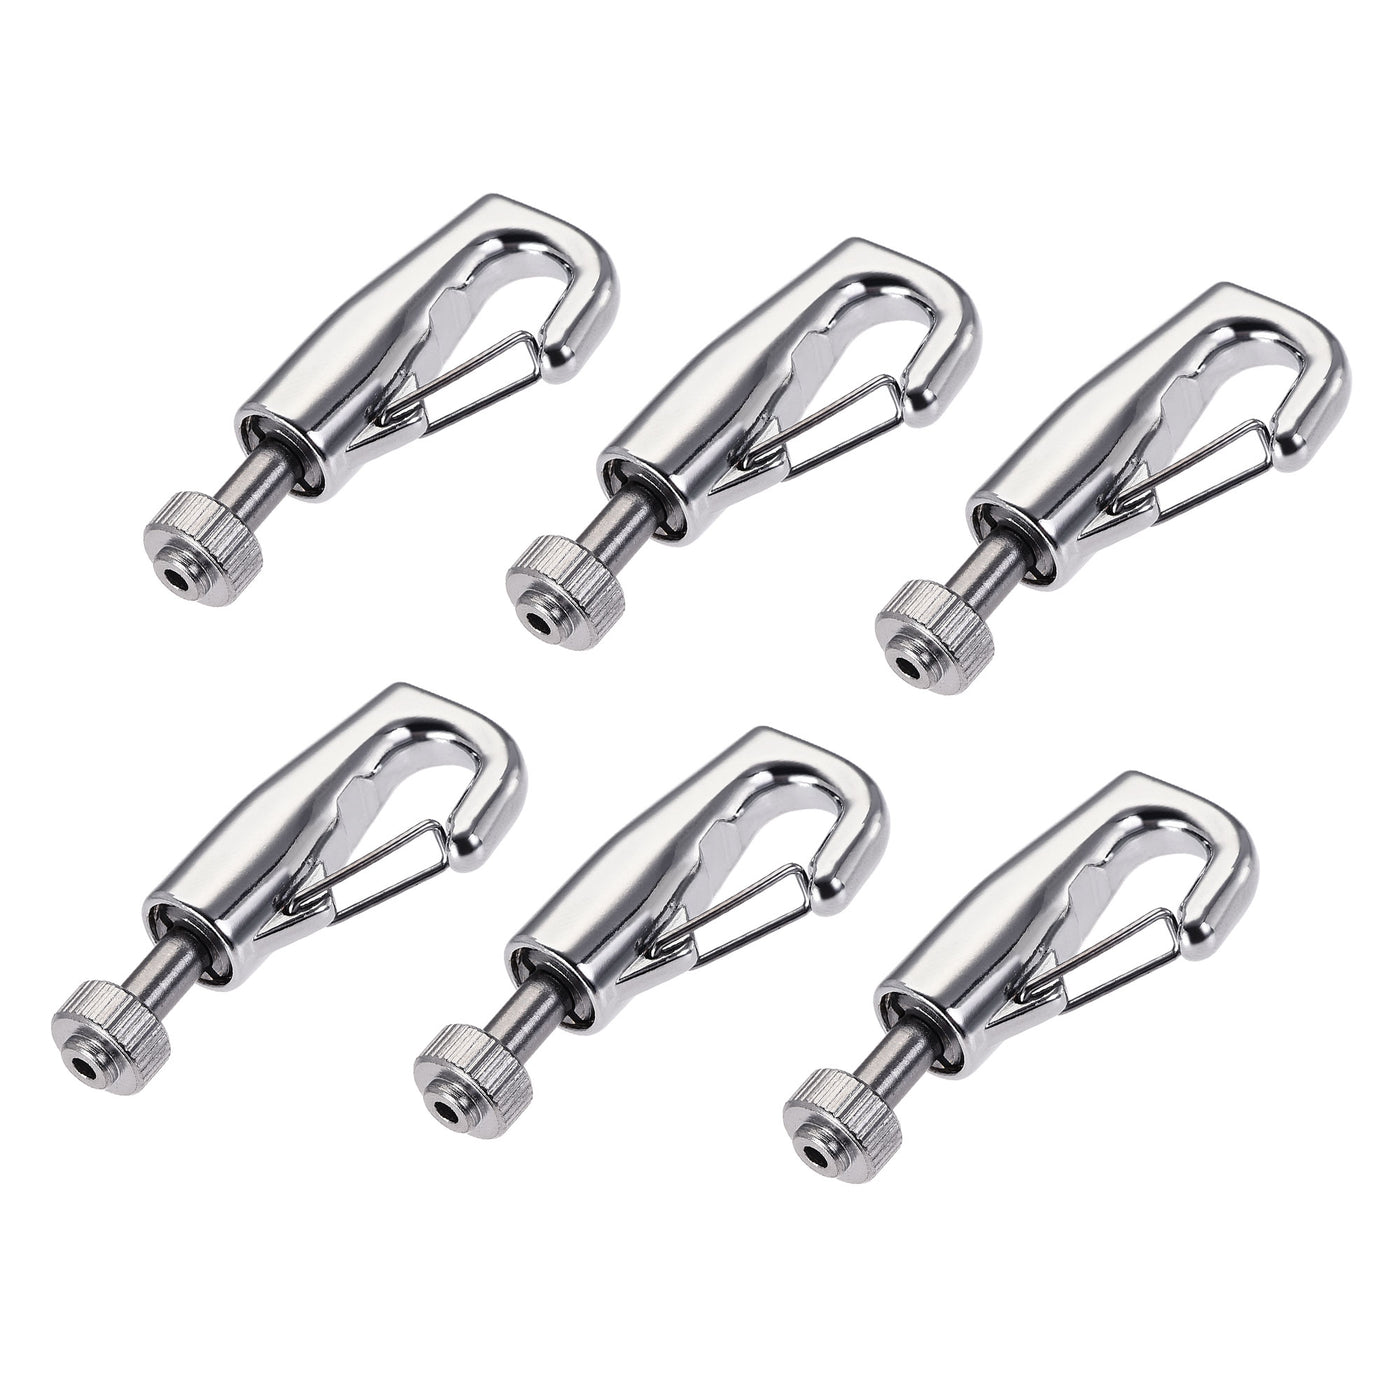 uxcell Uxcell Picture Hanging Wire Hook, 6pcs 7.5mm Open Adjustable Copper Hooks for Home Picture Art Gallery Picture Display Kit